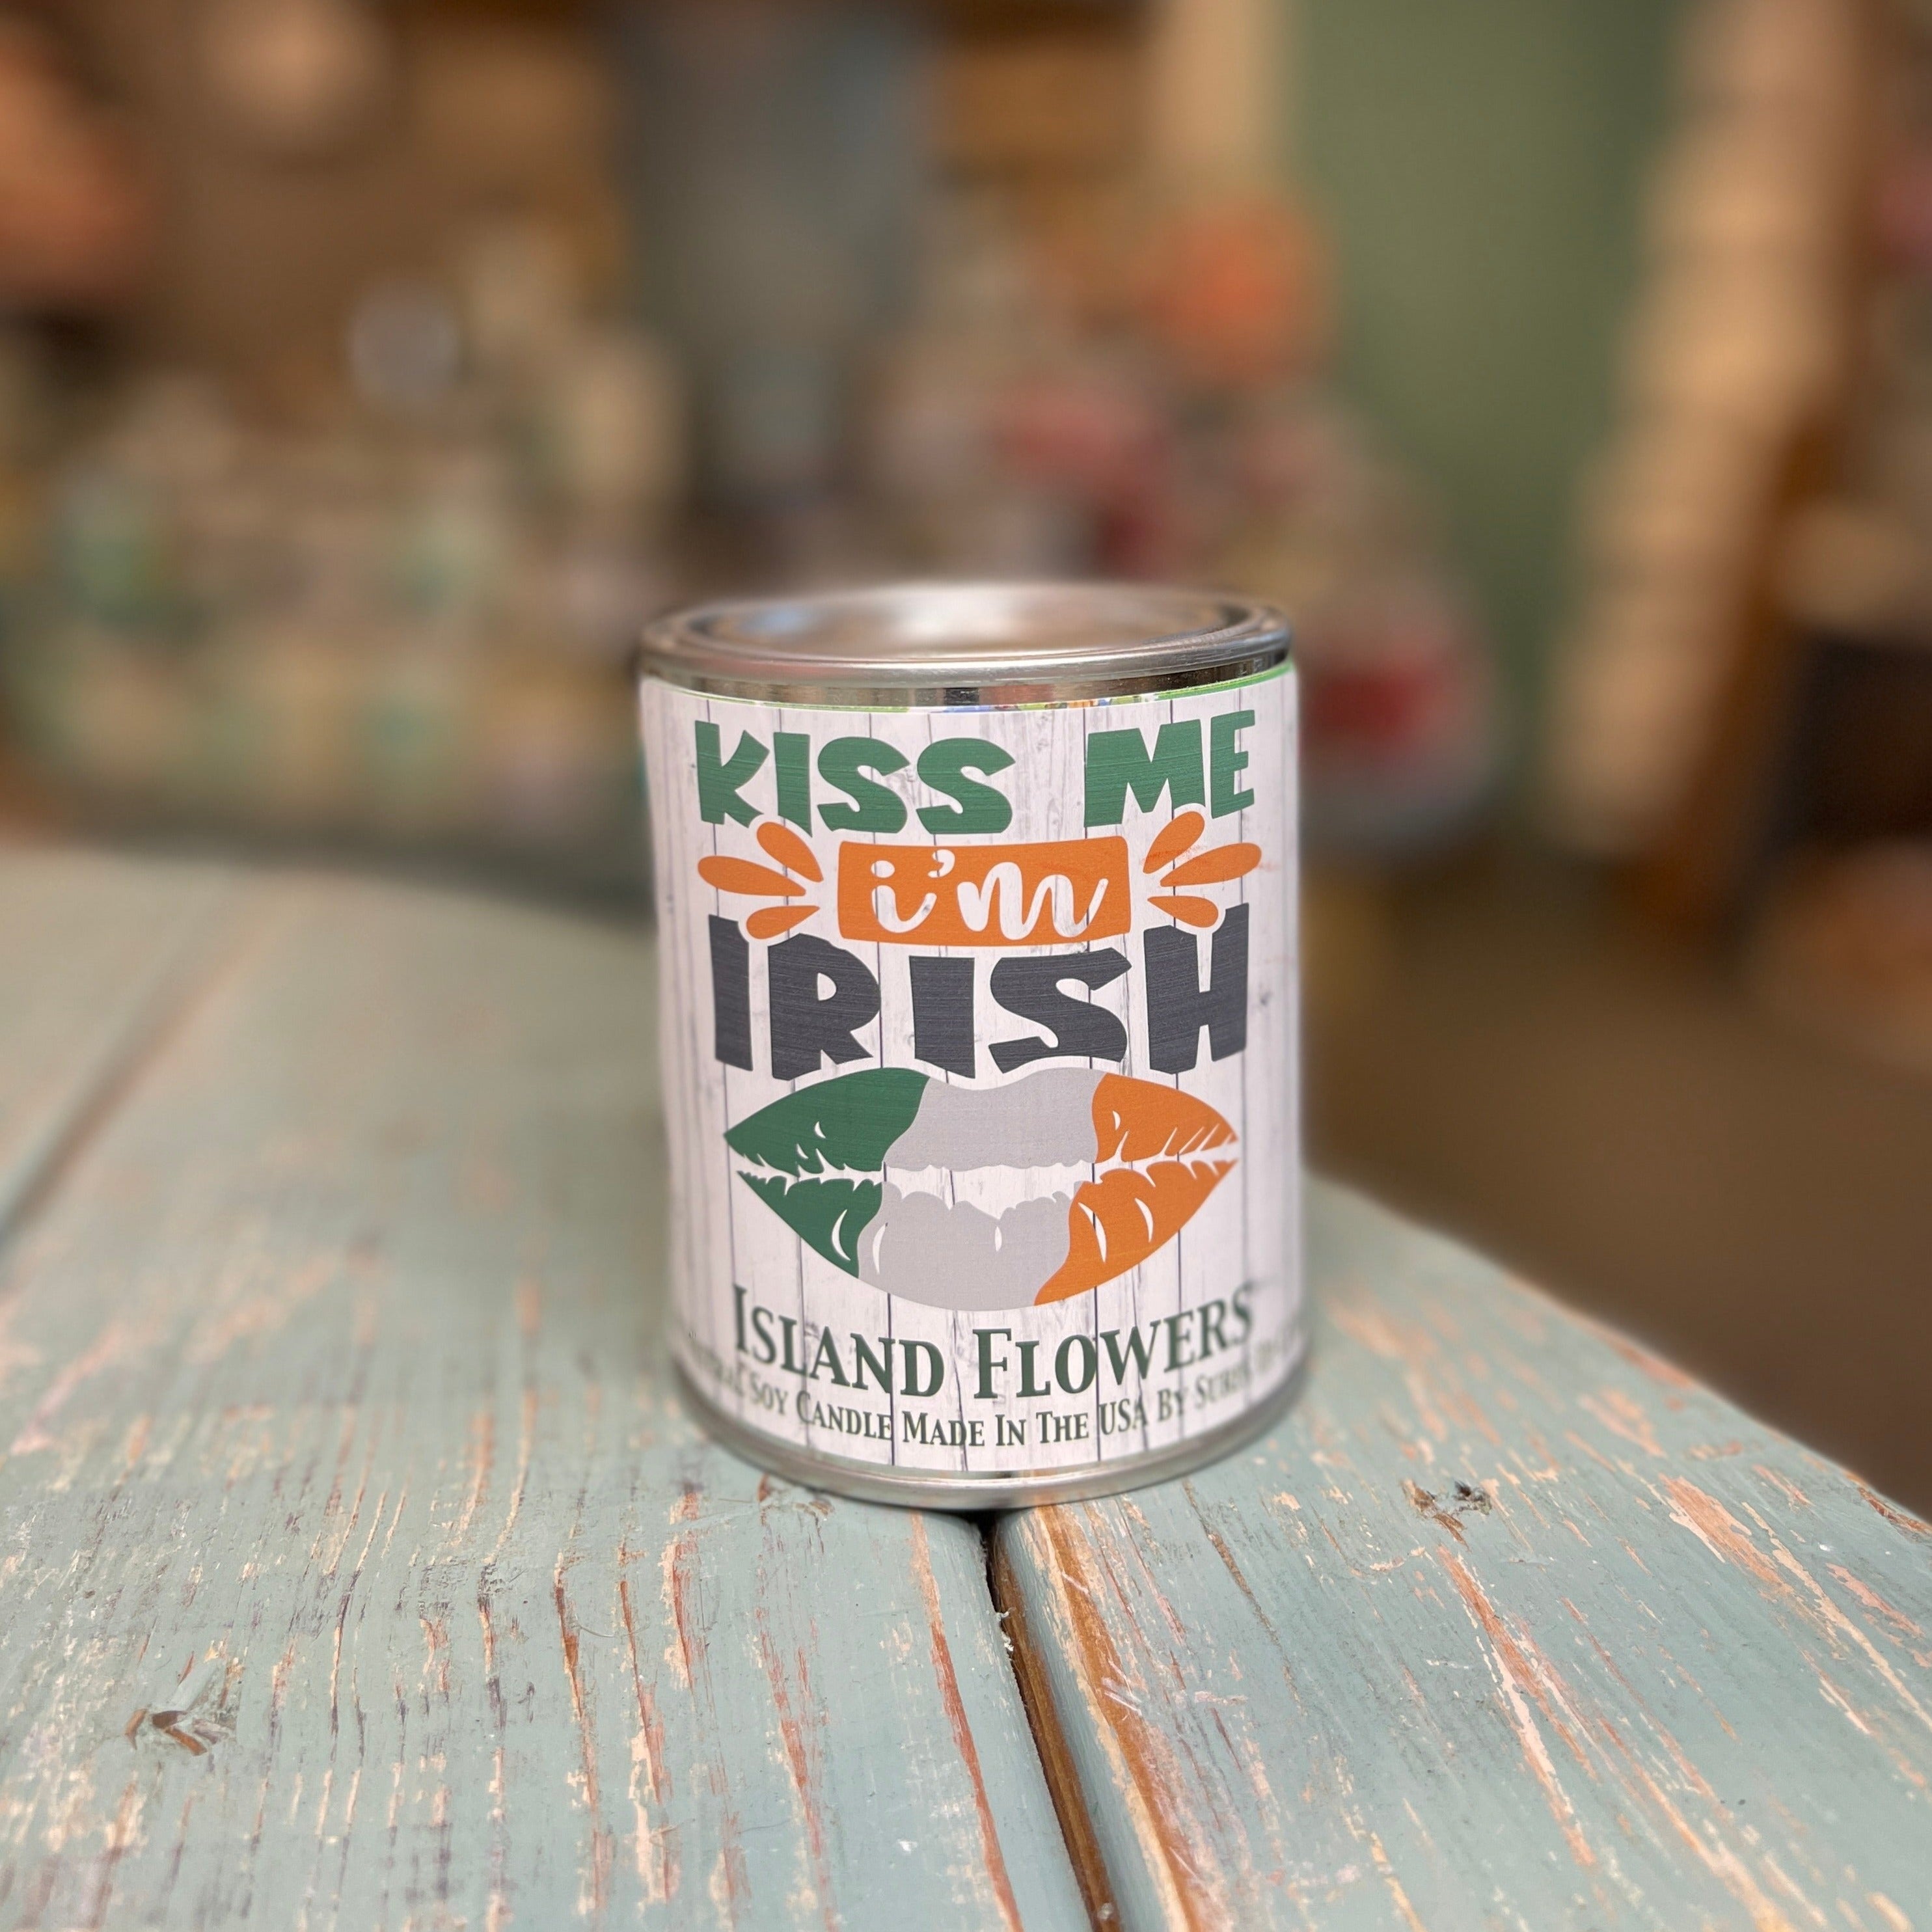 Kiss Me Island Flowers Paint Can Candle - St. Patrick's Day Collection